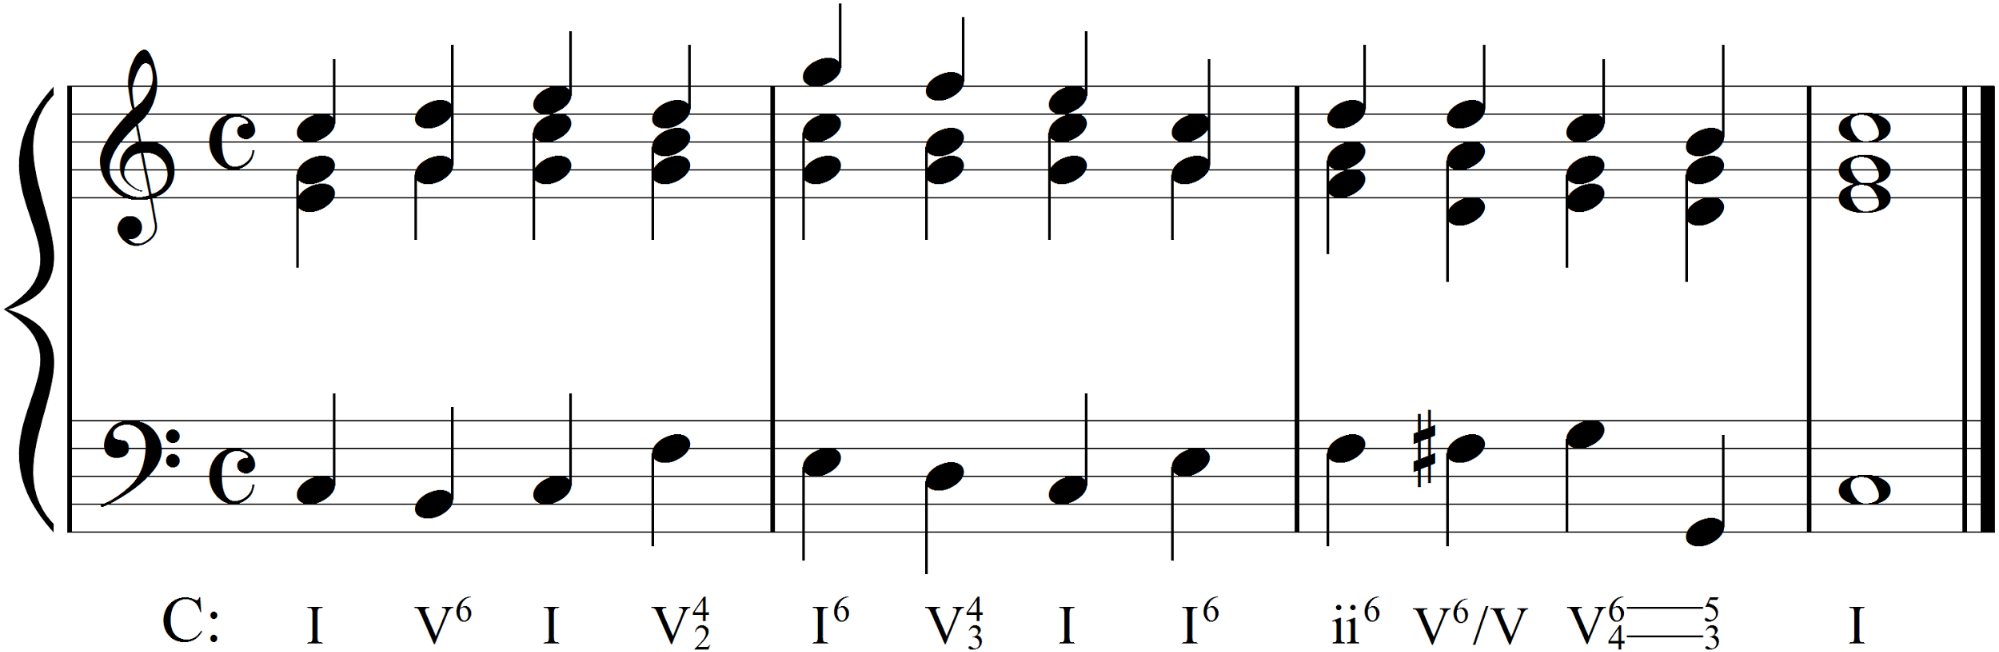 Notation of a four-measure harmonic progression in chorale style.